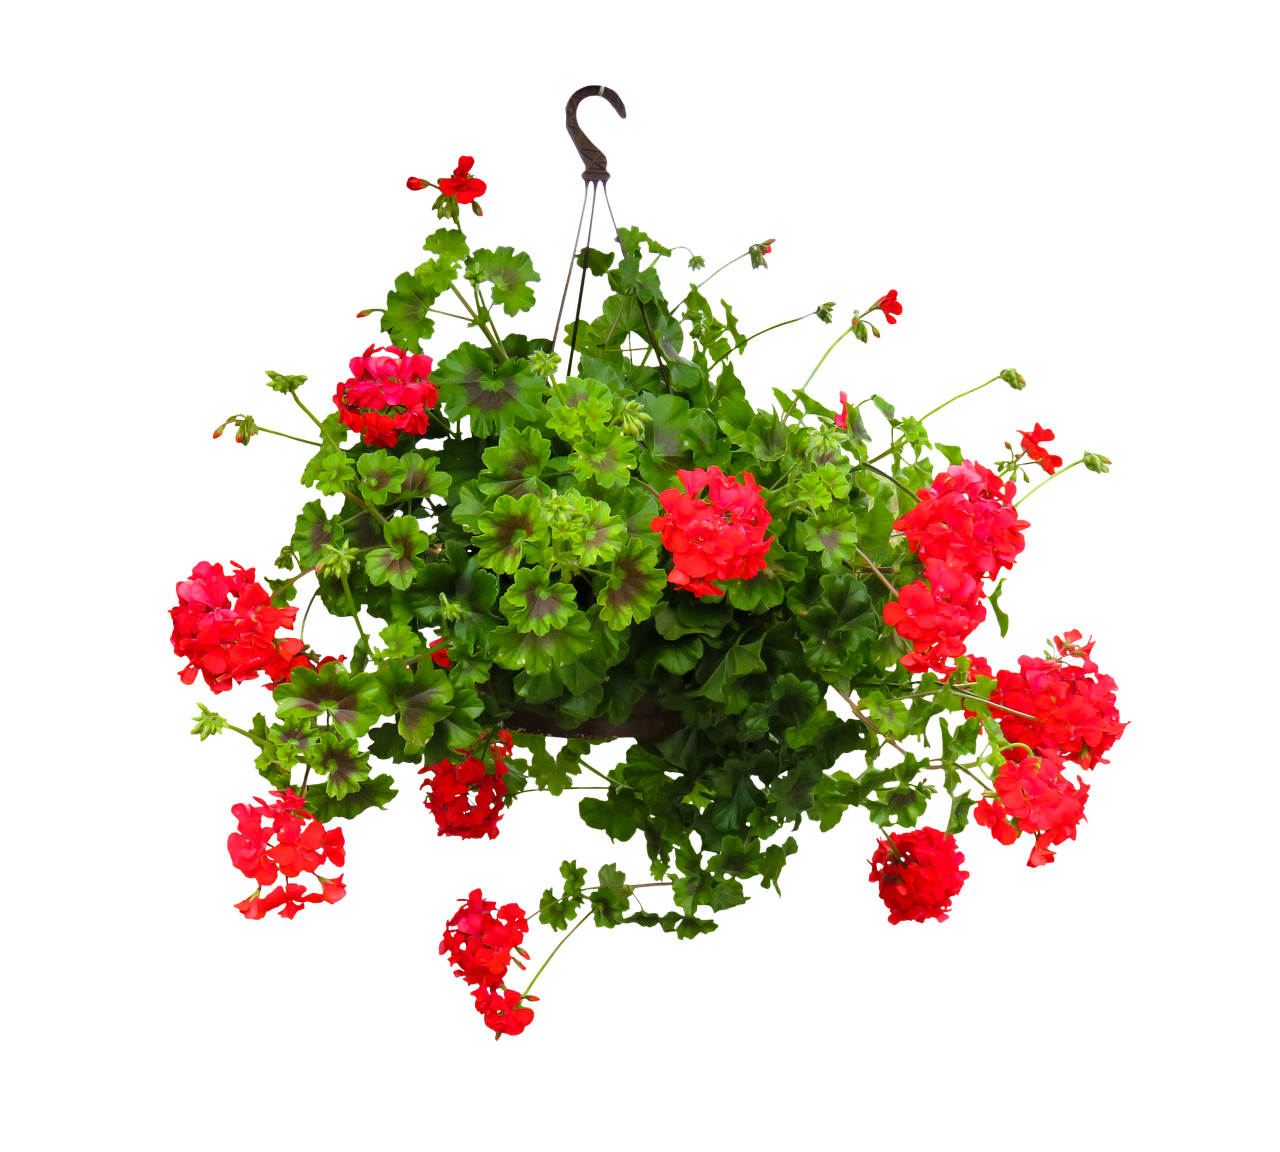 A Red Flowers In A Basket